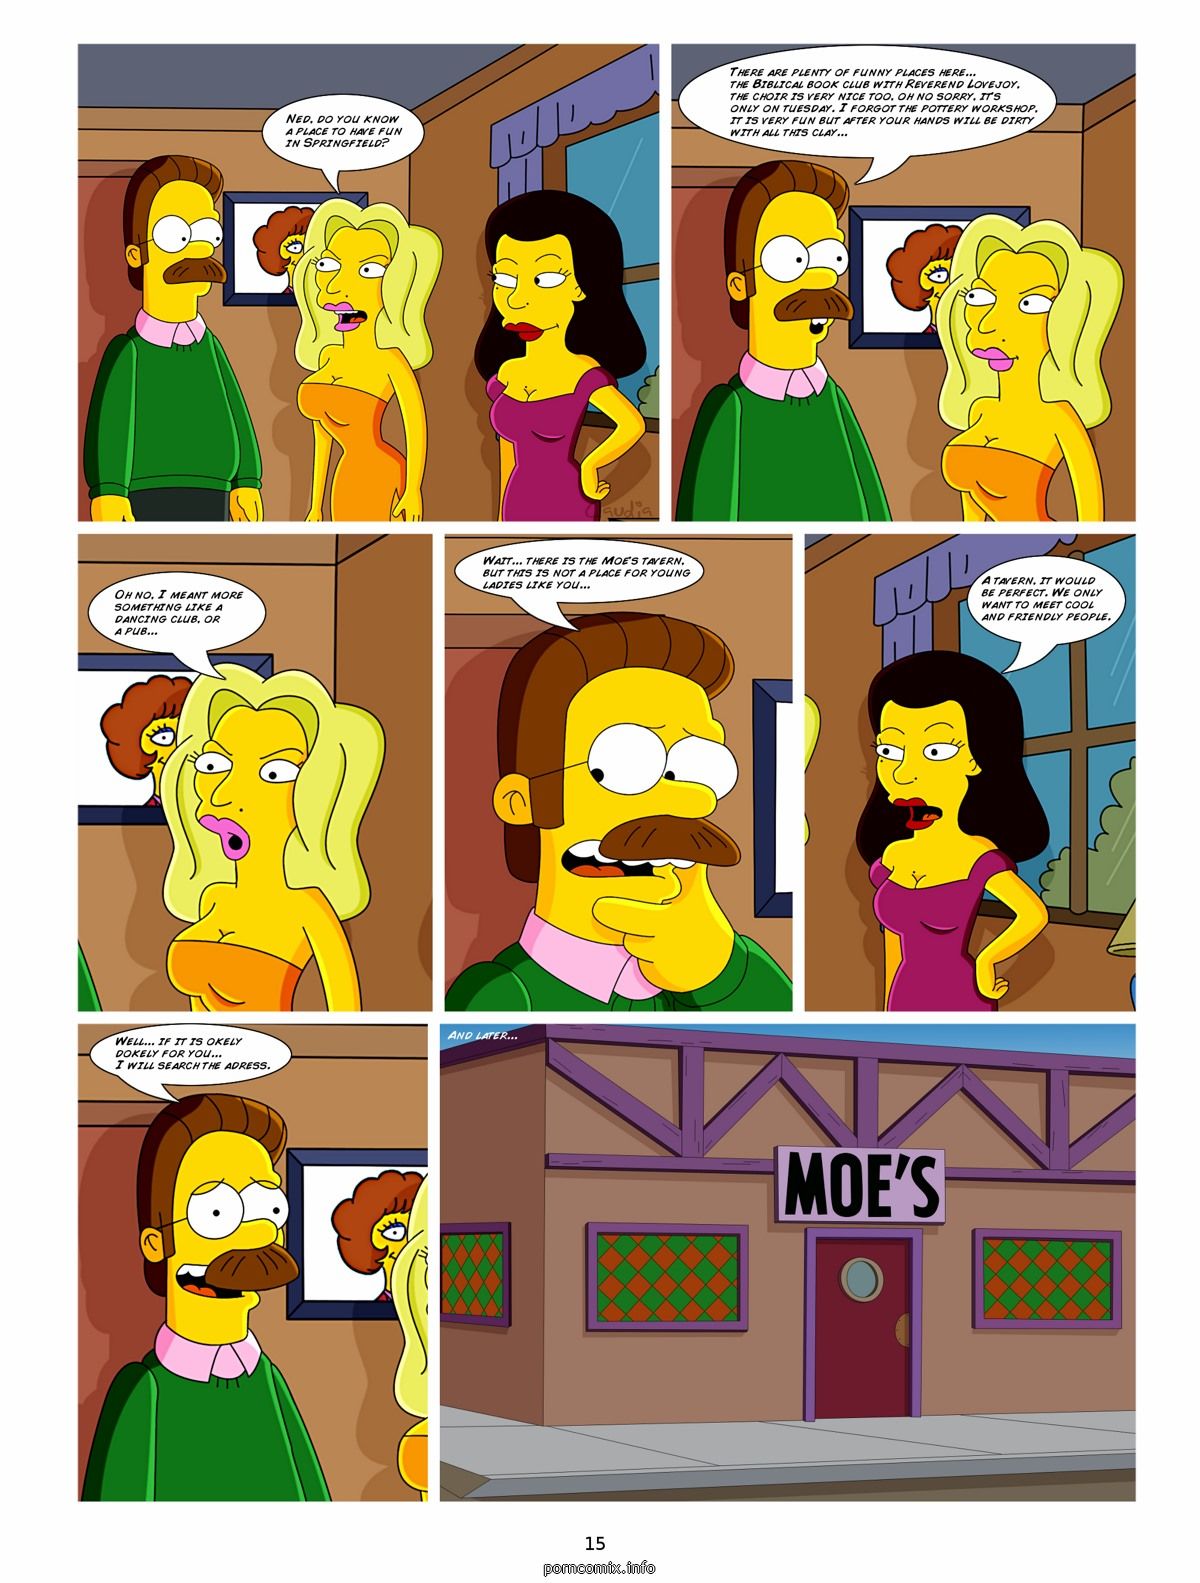 [Claudia] The Simpsons - Road To Springfield page 16